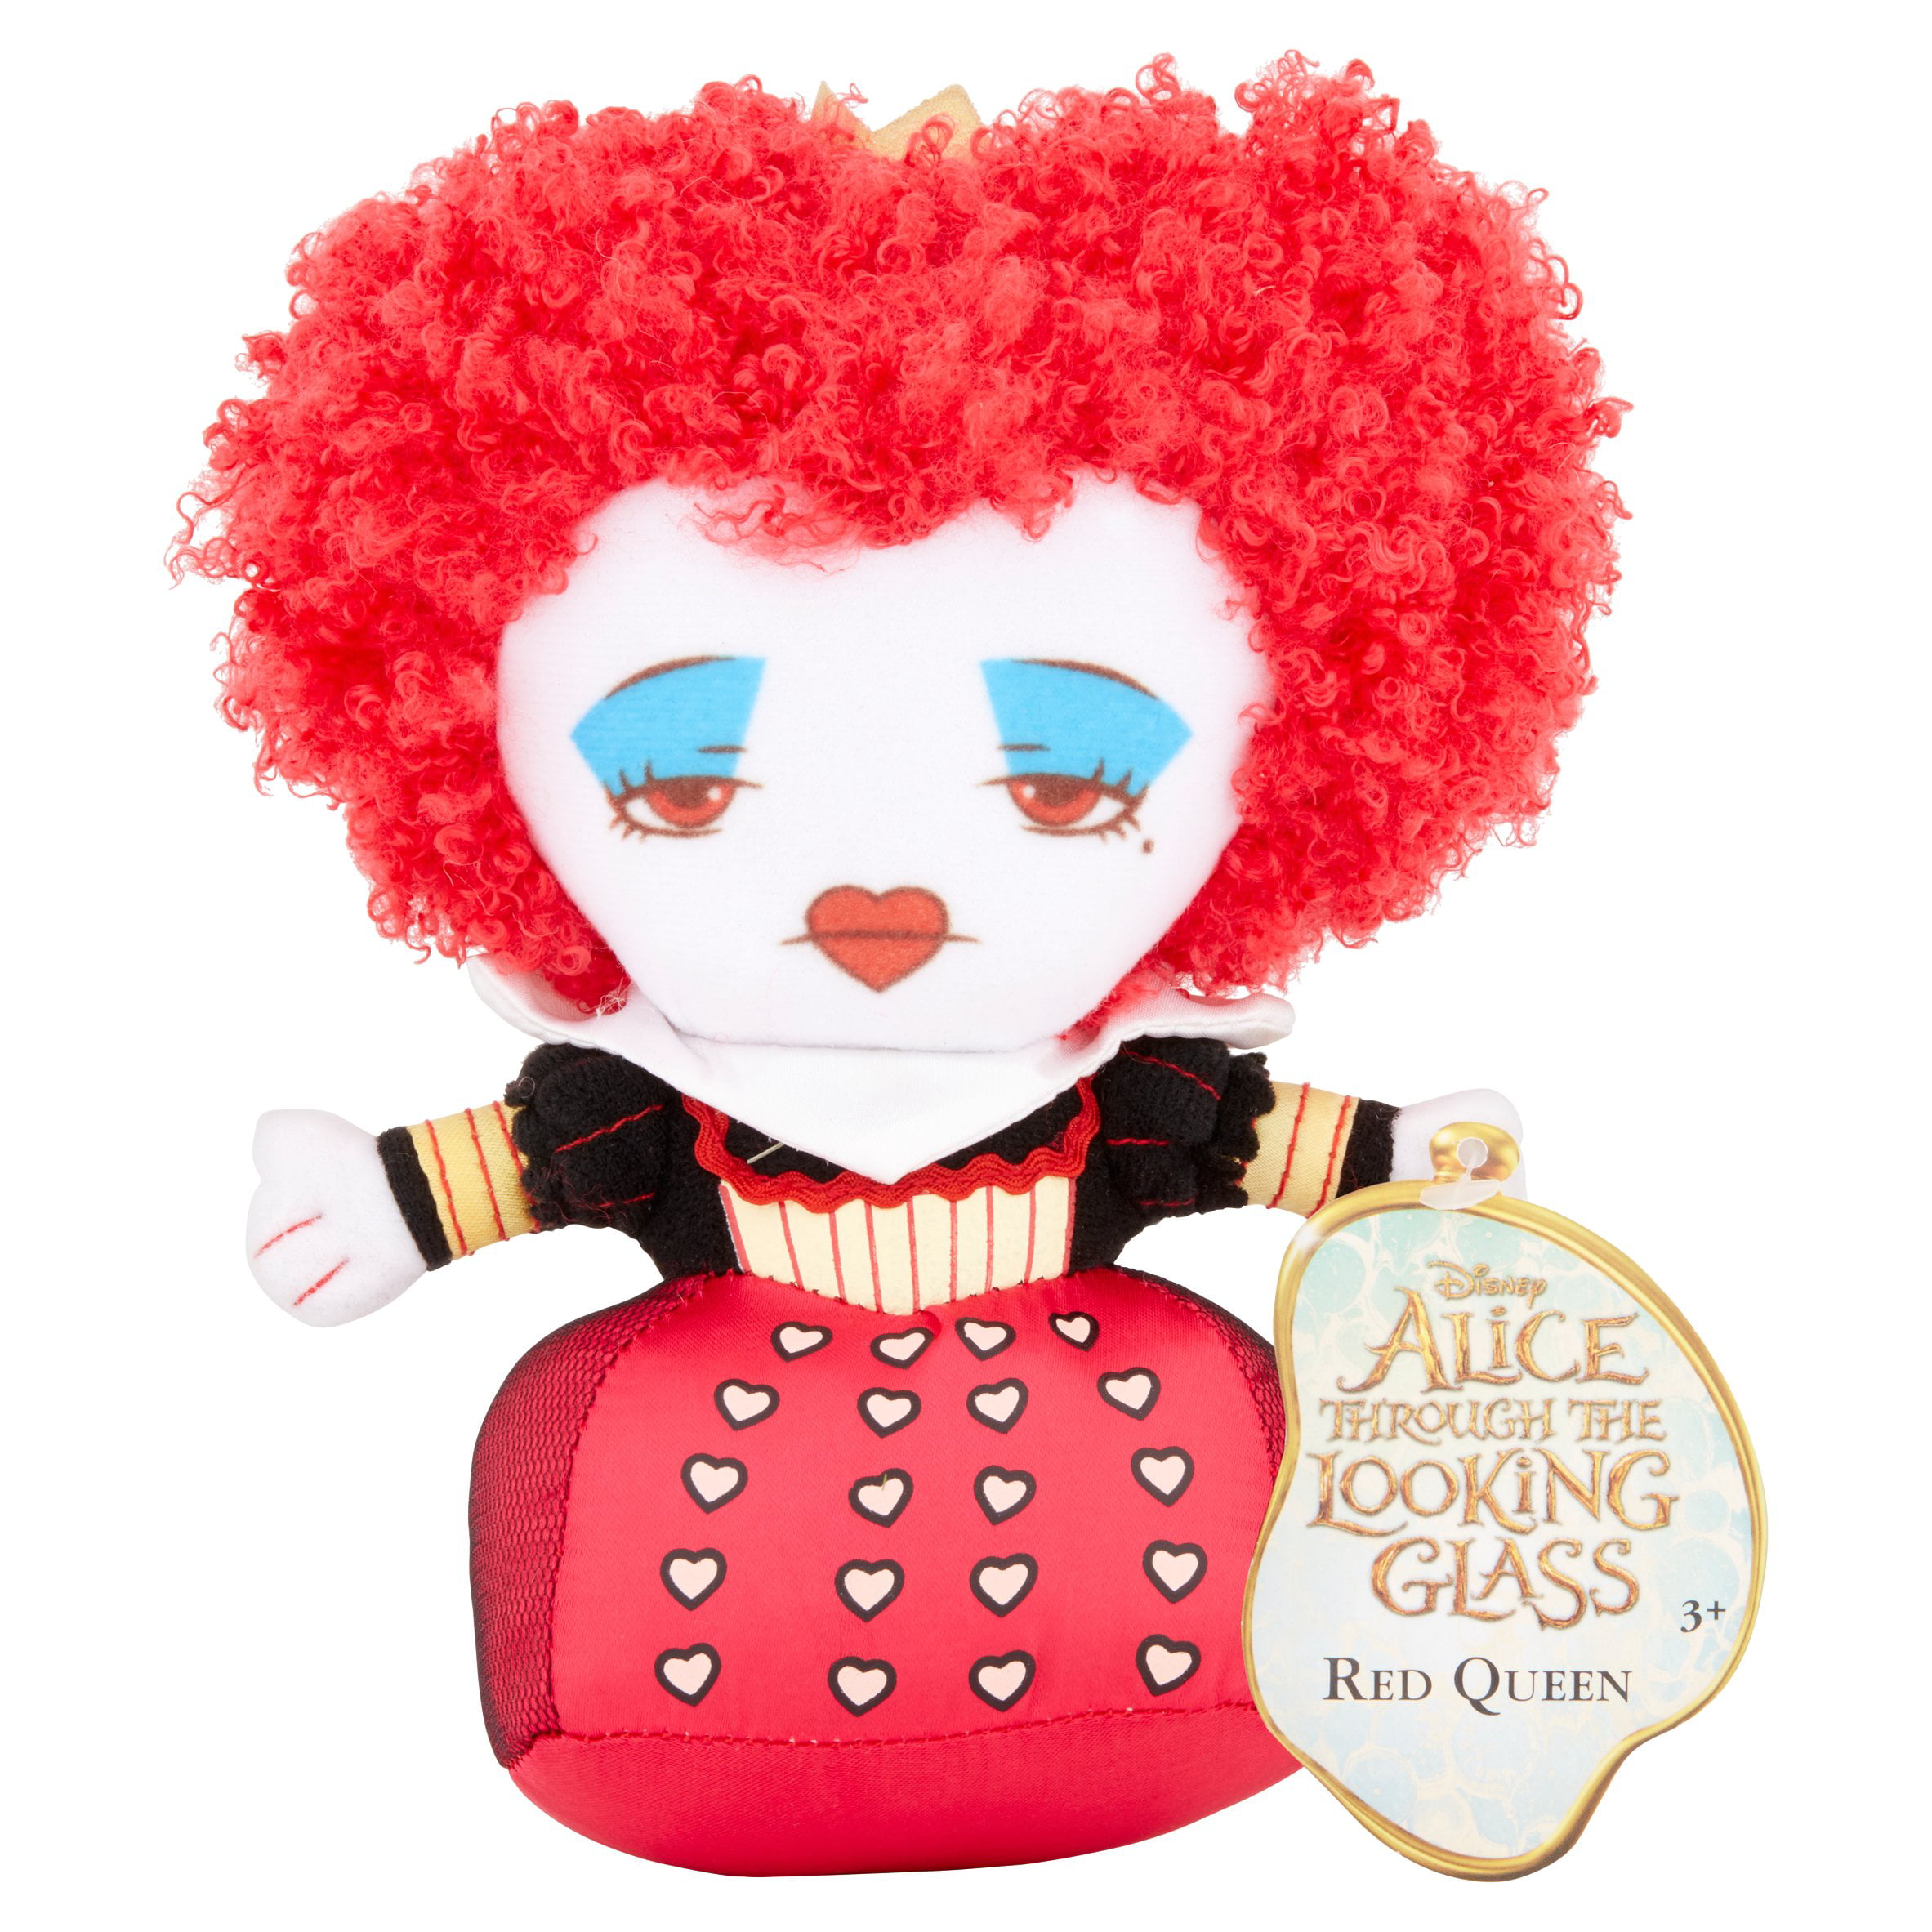 Alice Through the Looking Glass kitchen items available at Disney